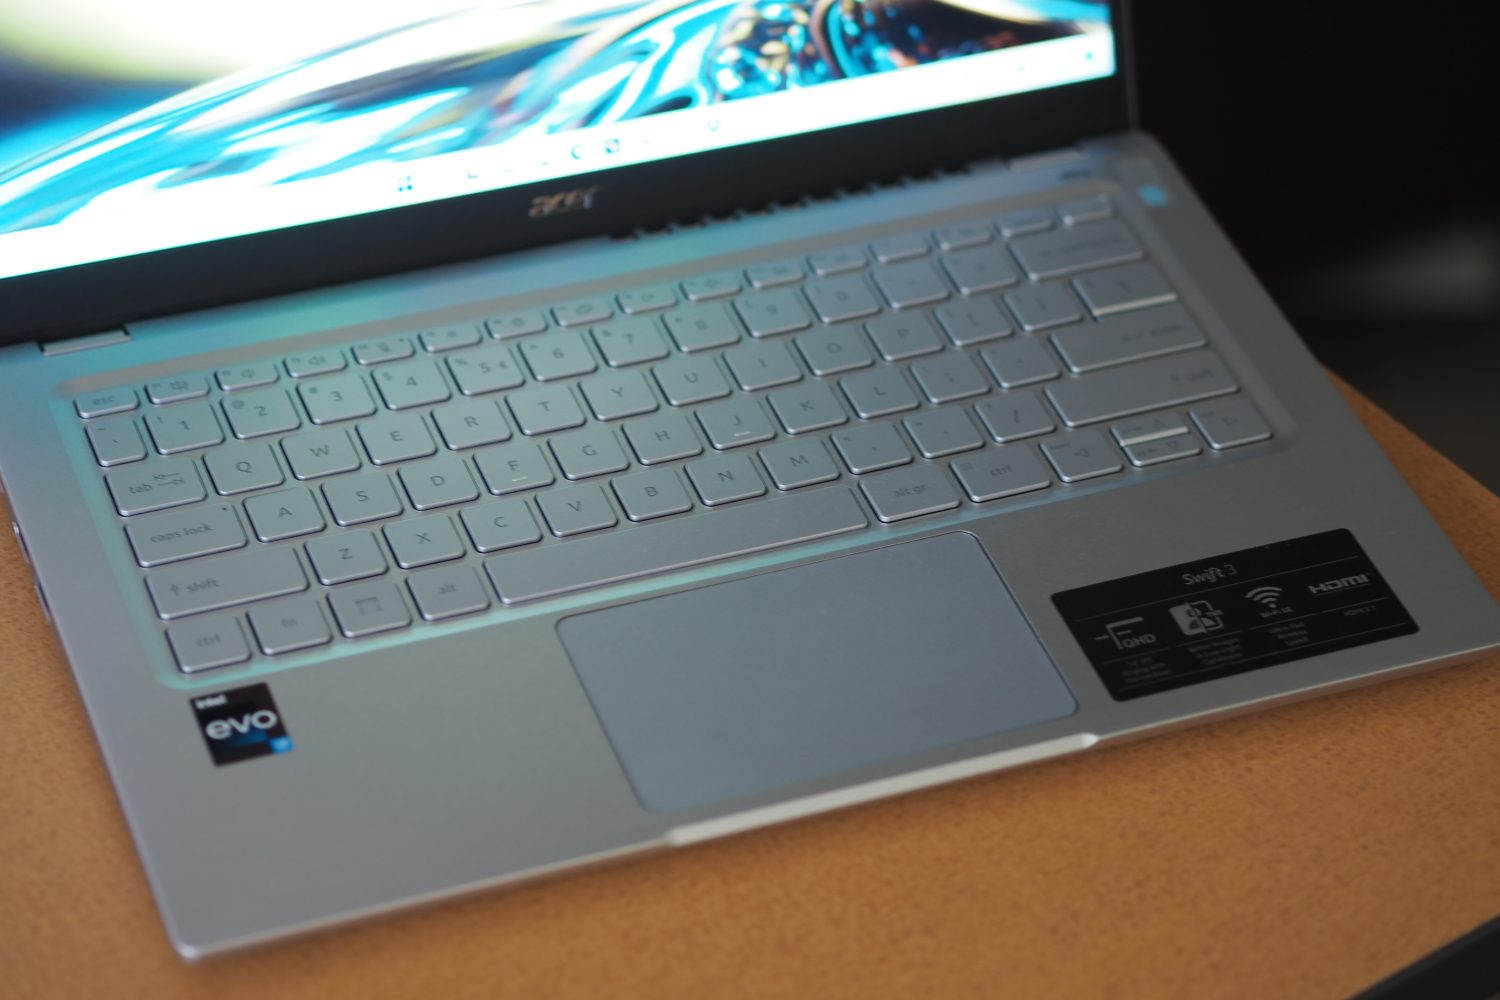 Acer Swift 3 2022 top down view showing keyboard and touchpad.